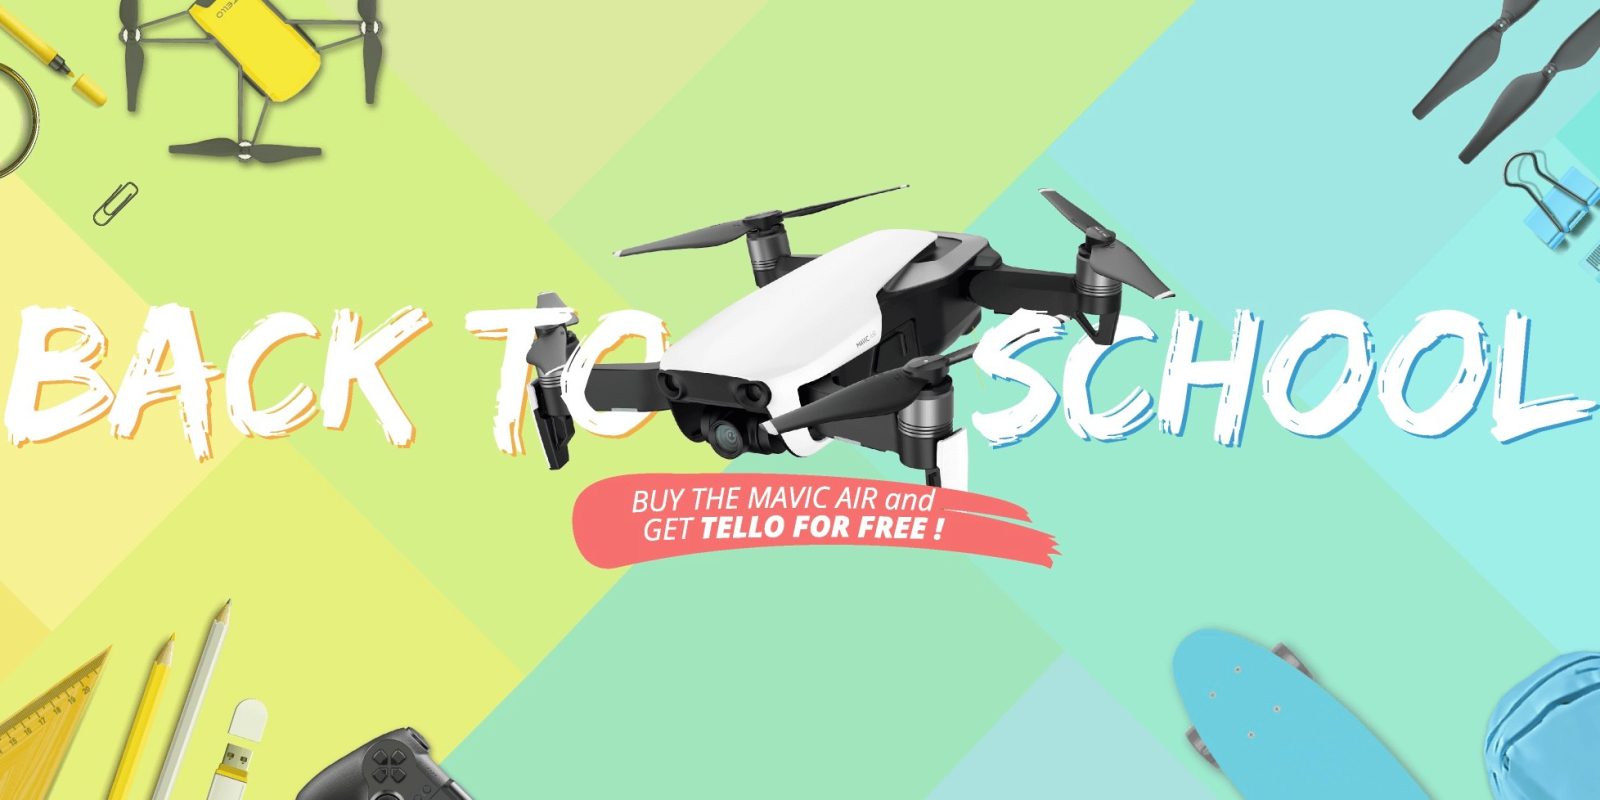 DJI's "Back To School" special - Buy a Mavic Air Fly More combo and get the Tello for free